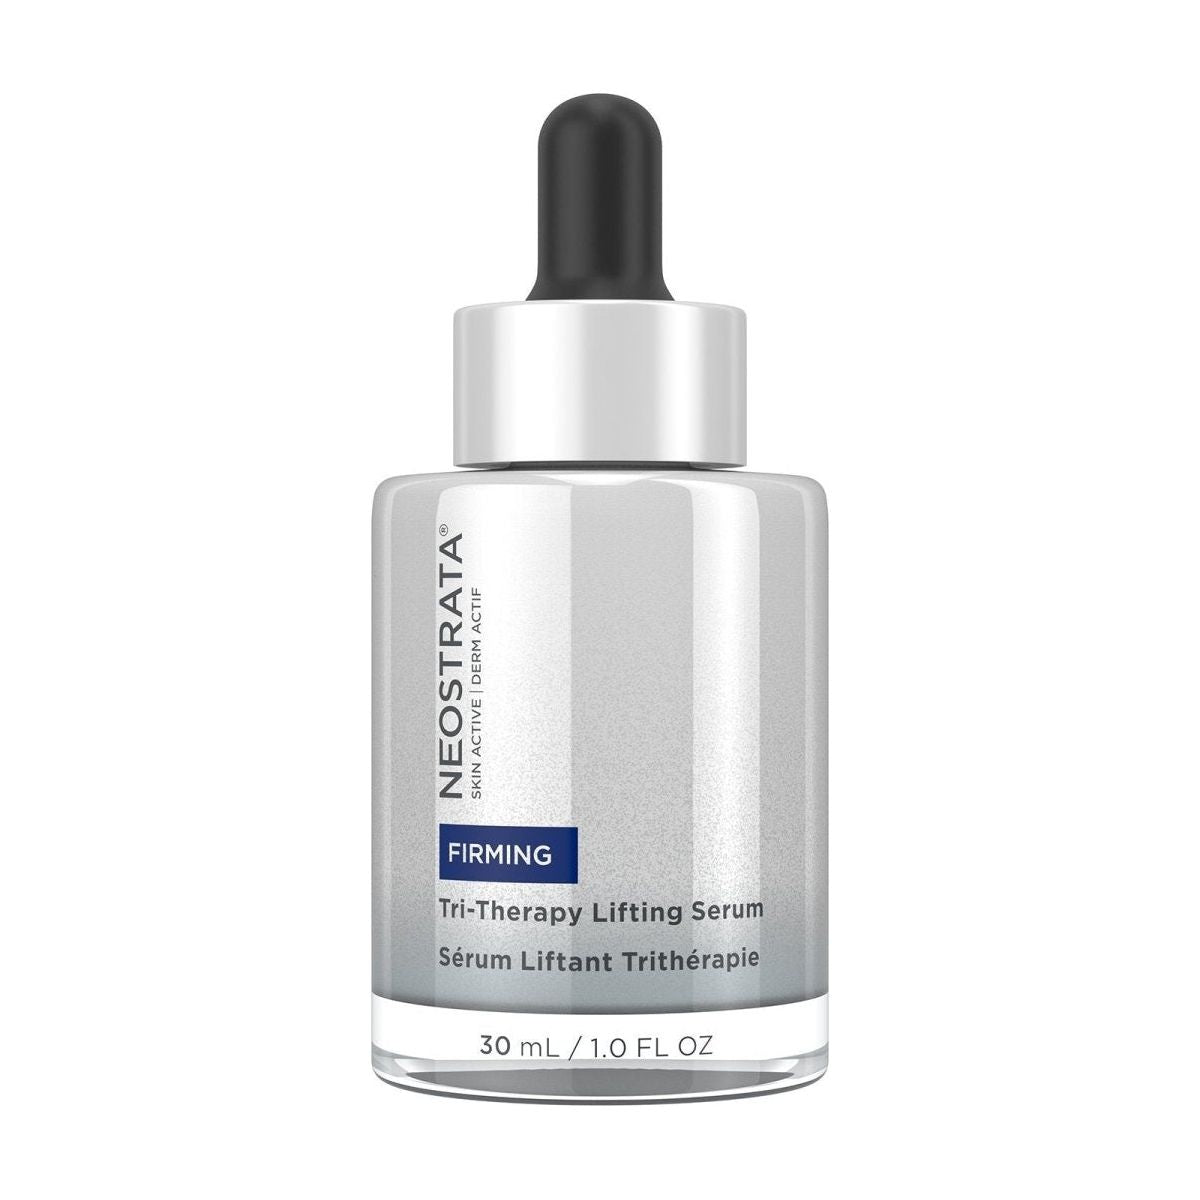 Neostrata | Firming Tri-Therapy Lifting Serum - DG International Ventures Limited